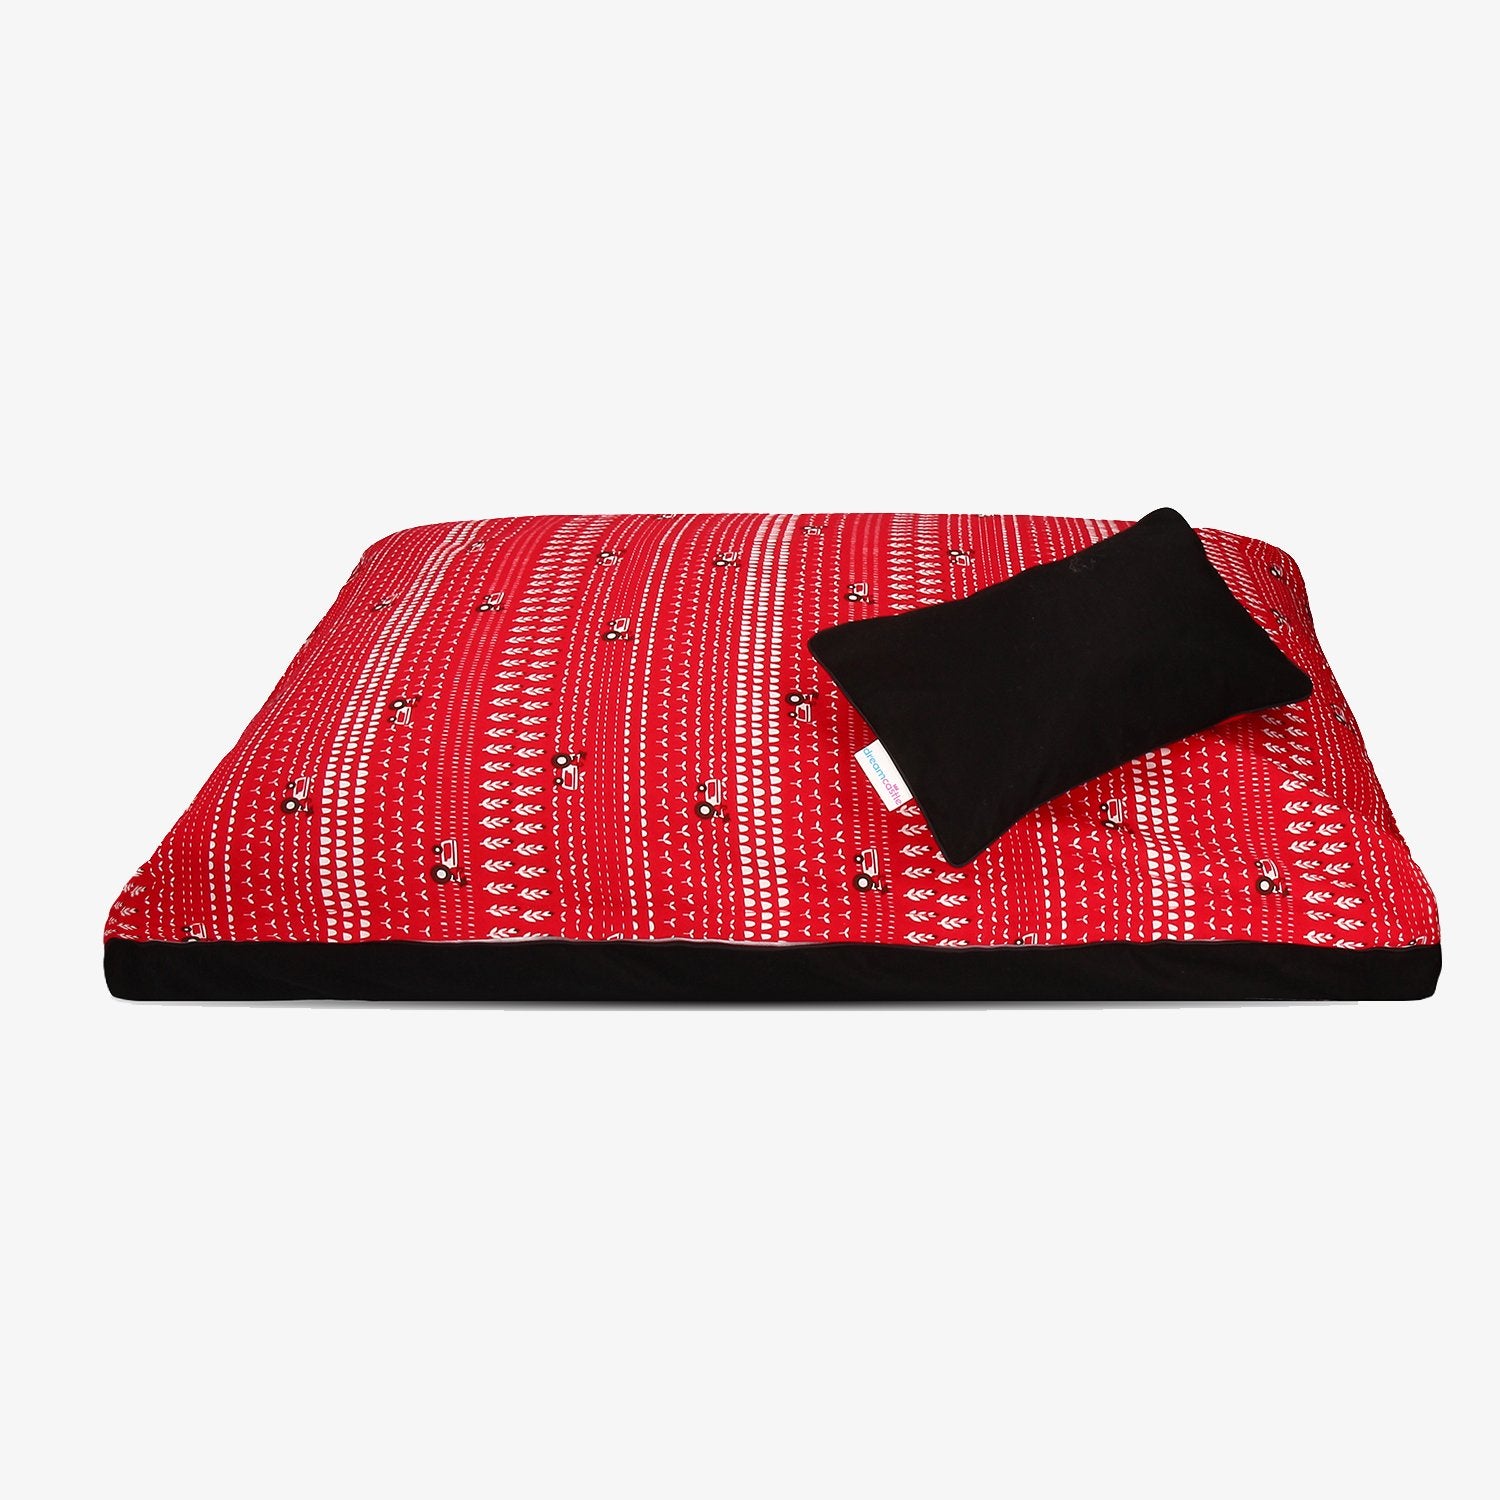 Velvety Vermillion | Bright red pattern paired with elegant black natural dog bed cover from DreamCastle - Little Cherry